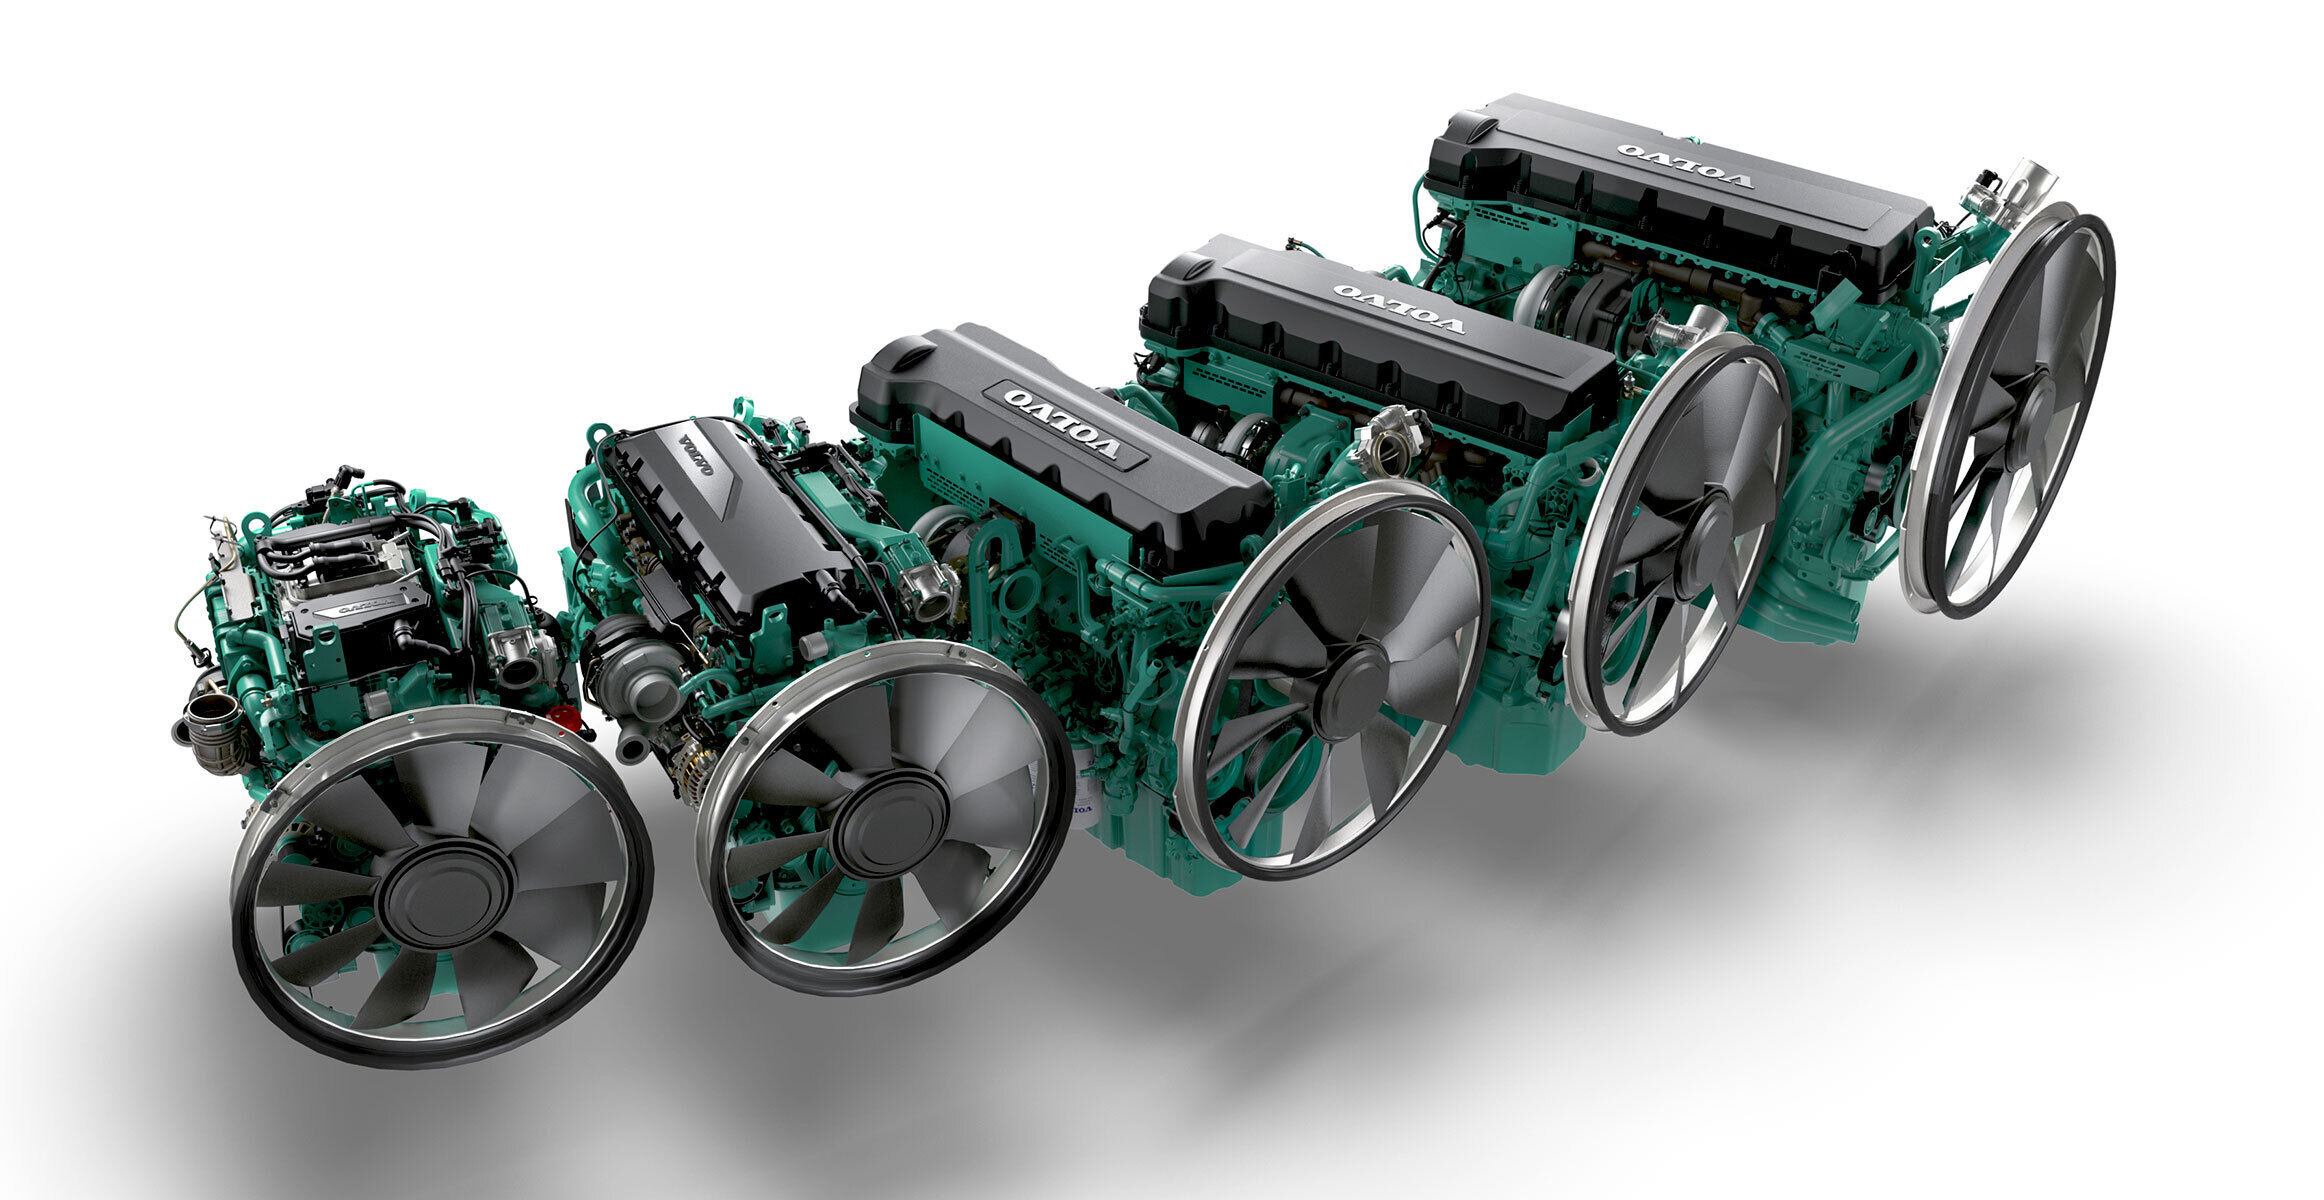 Volvo Penta launches a new 16-liter engine for mobile versatile  applications